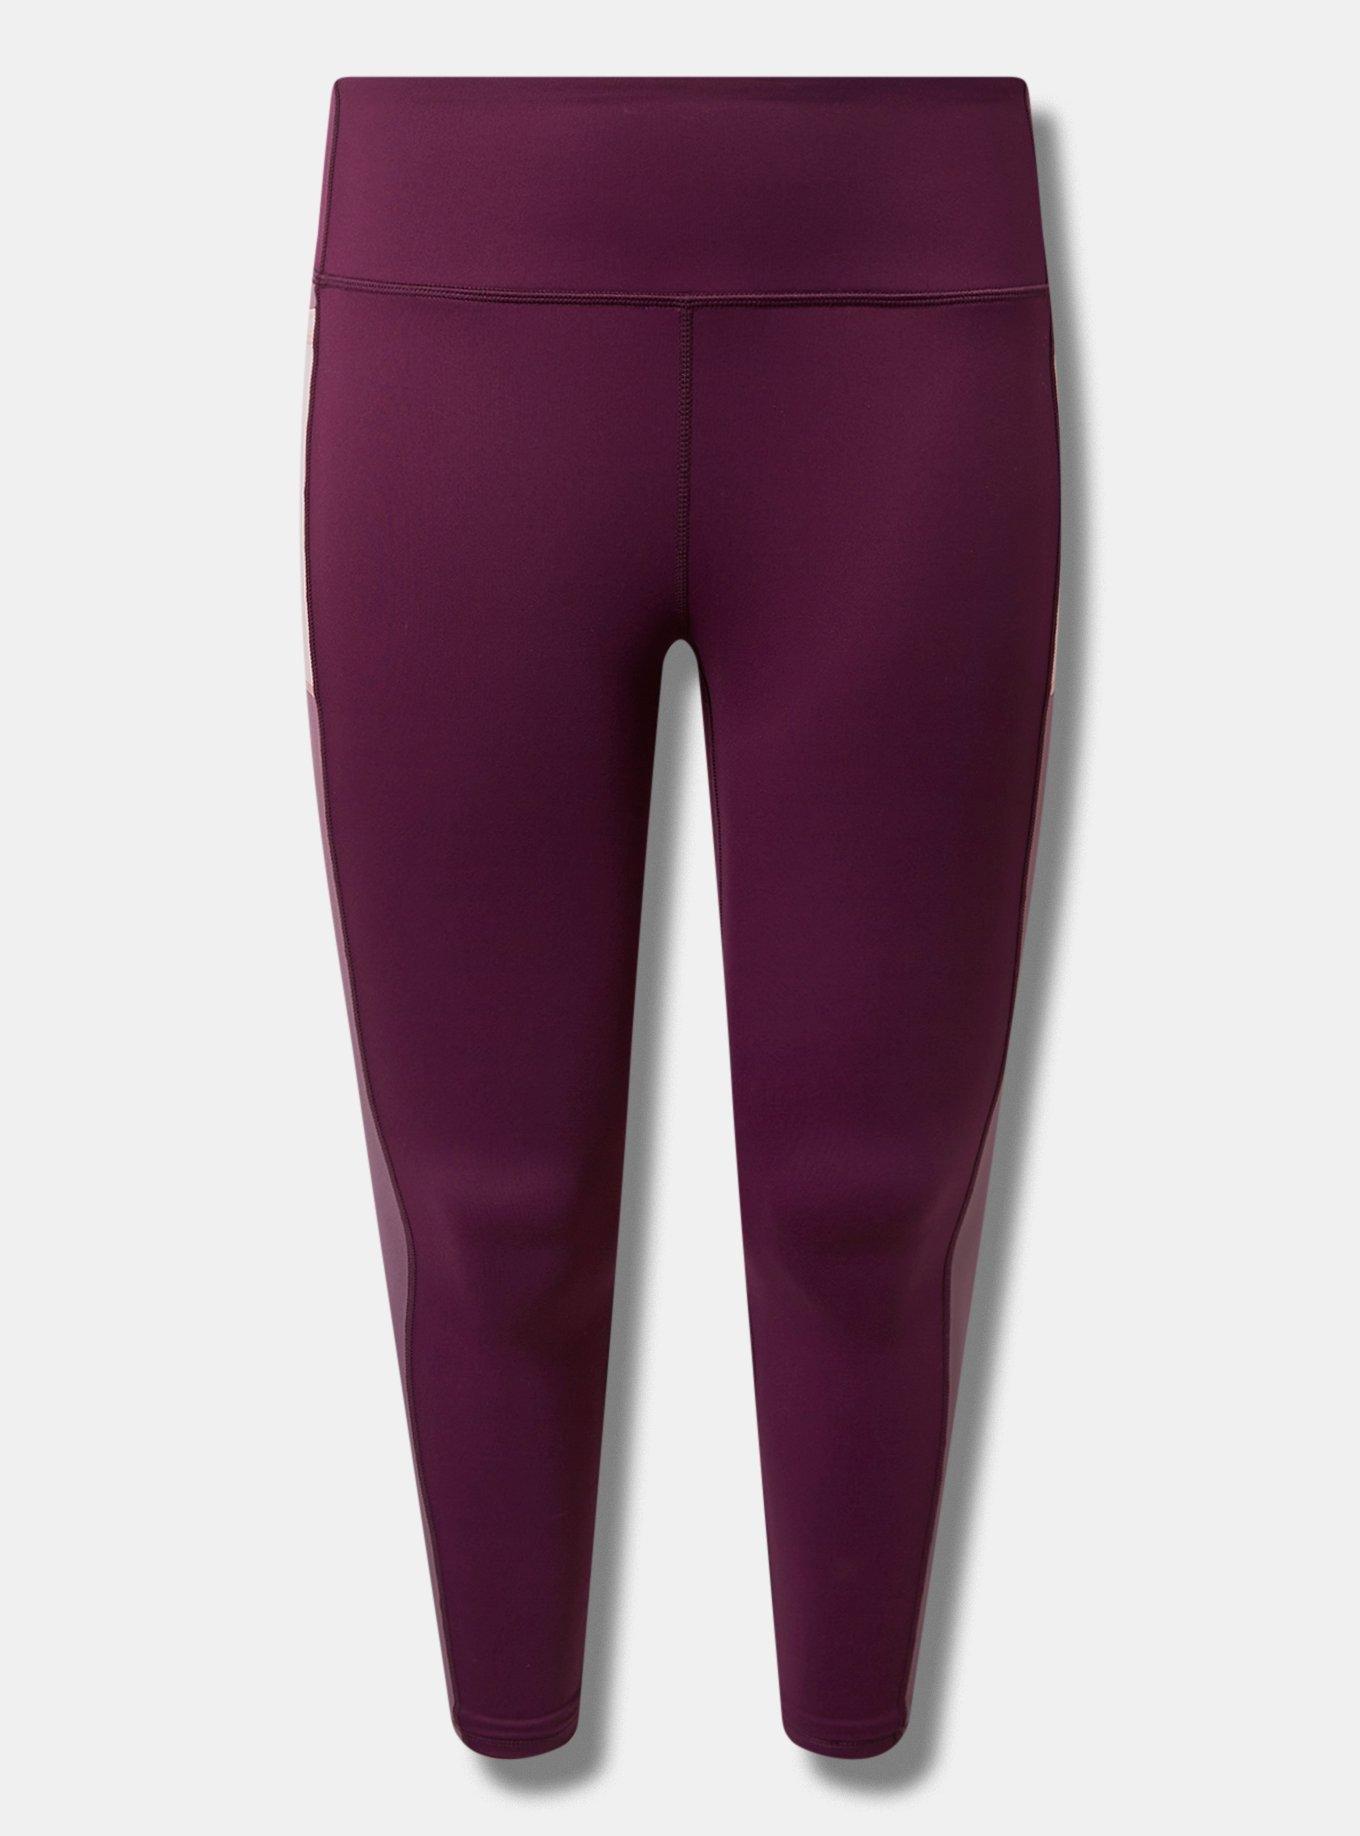 Responsible, Fashion Legging with Side Knot Detail - PENN